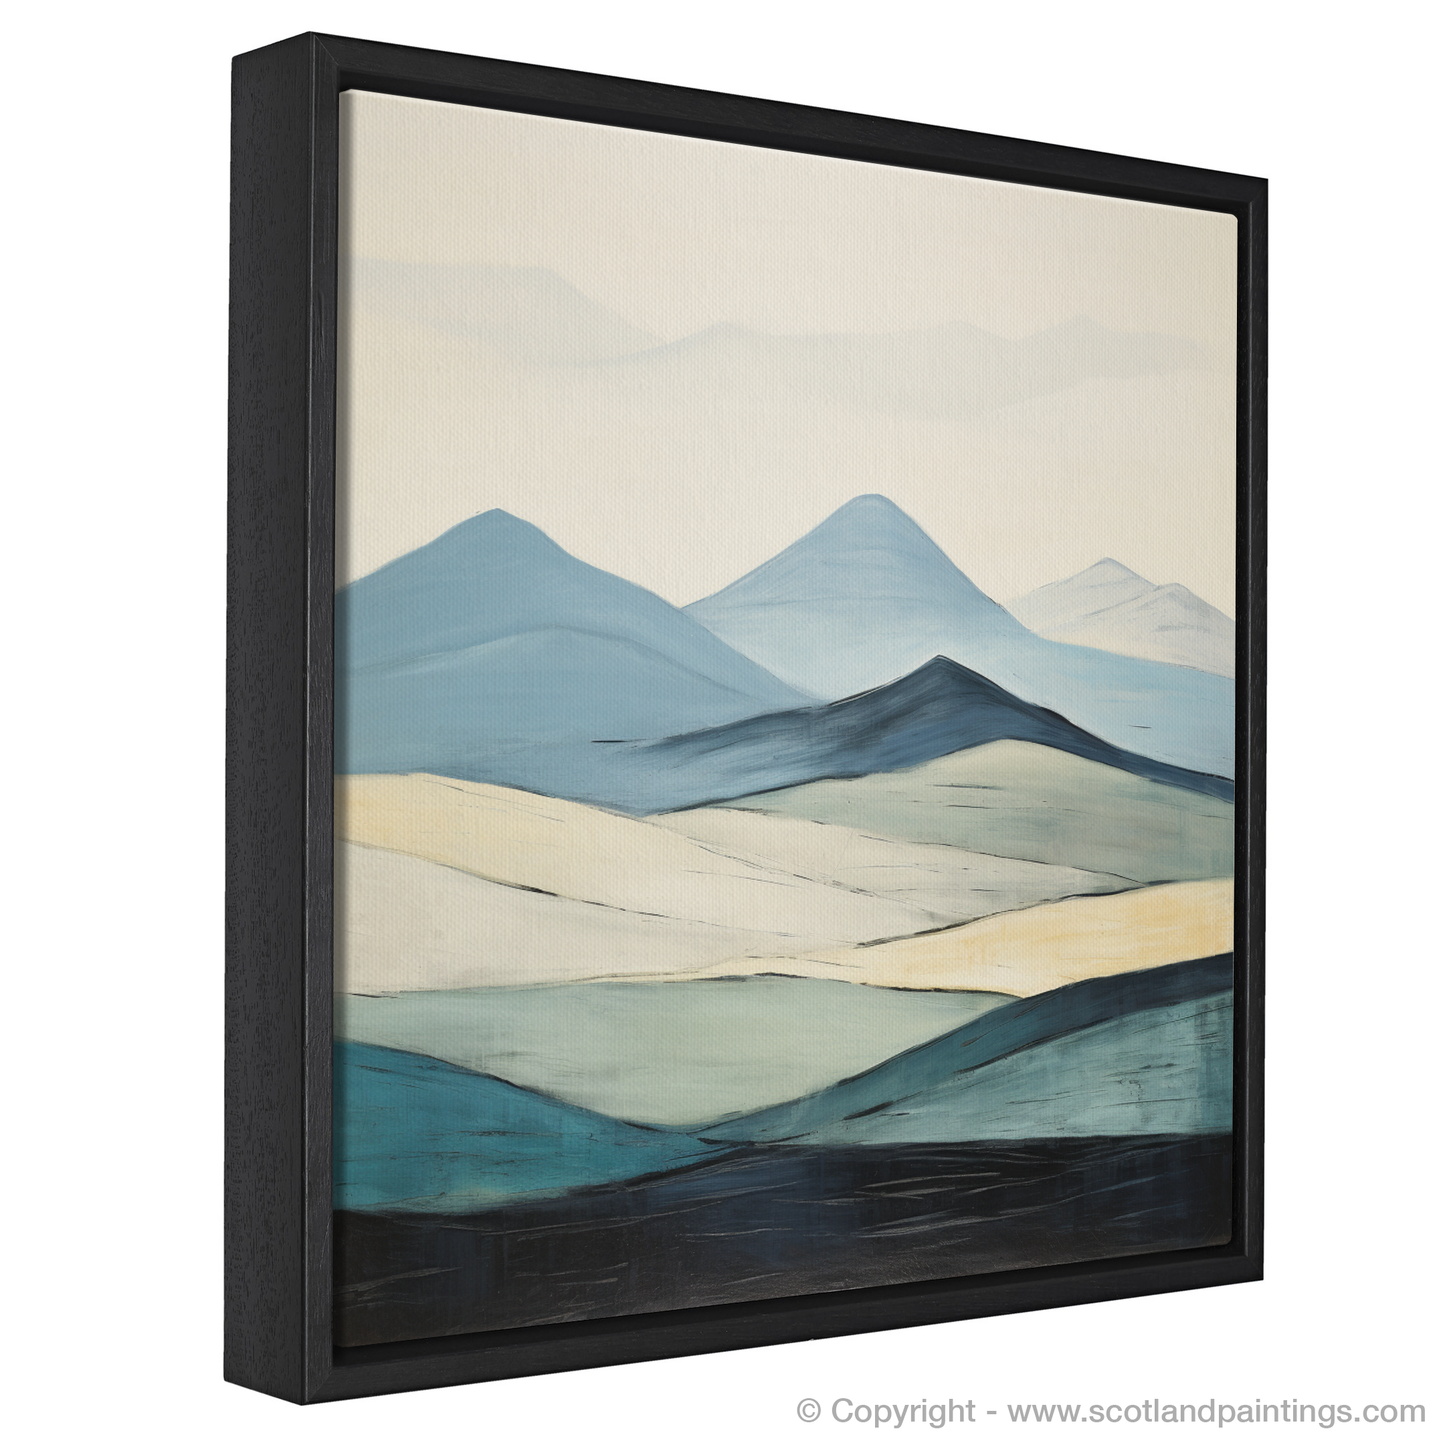 Painting and Art Print of Meall Corranaich entitled "Meall Corranaich in Abstract Tones: A Scottish Munro Reimagined".